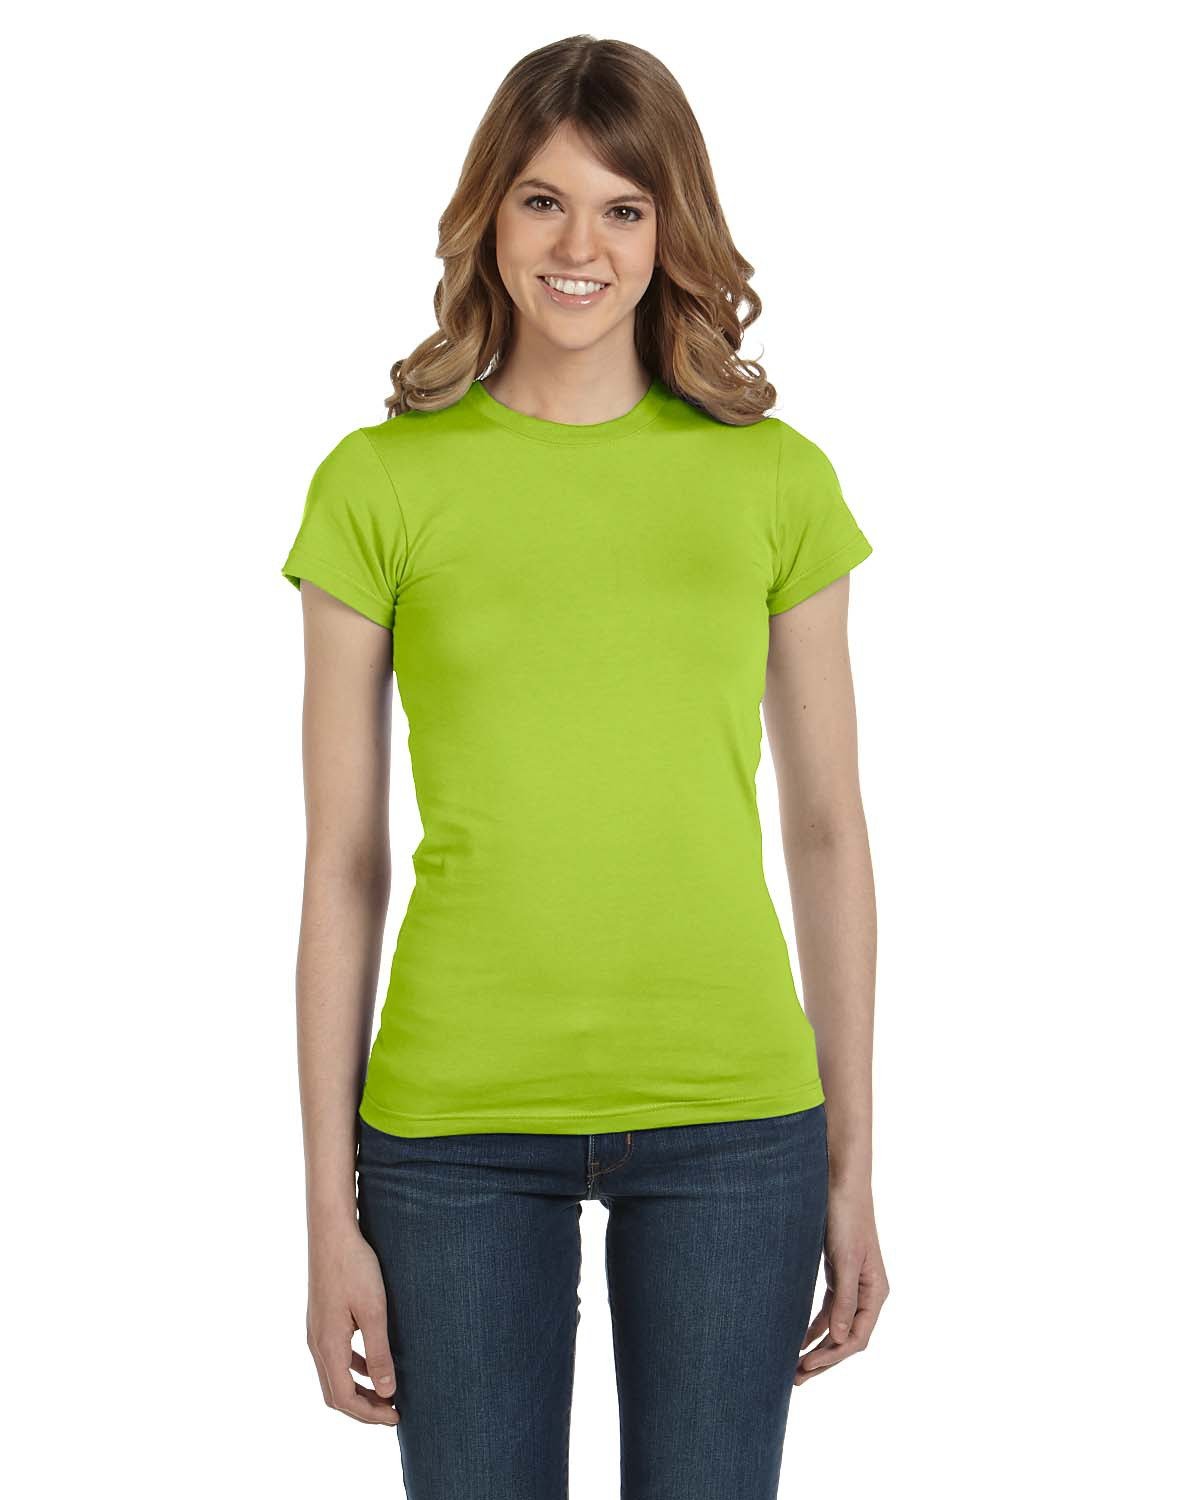 Anvil Ladies' Lightweight Fitted T-Shirt KEY LIME 